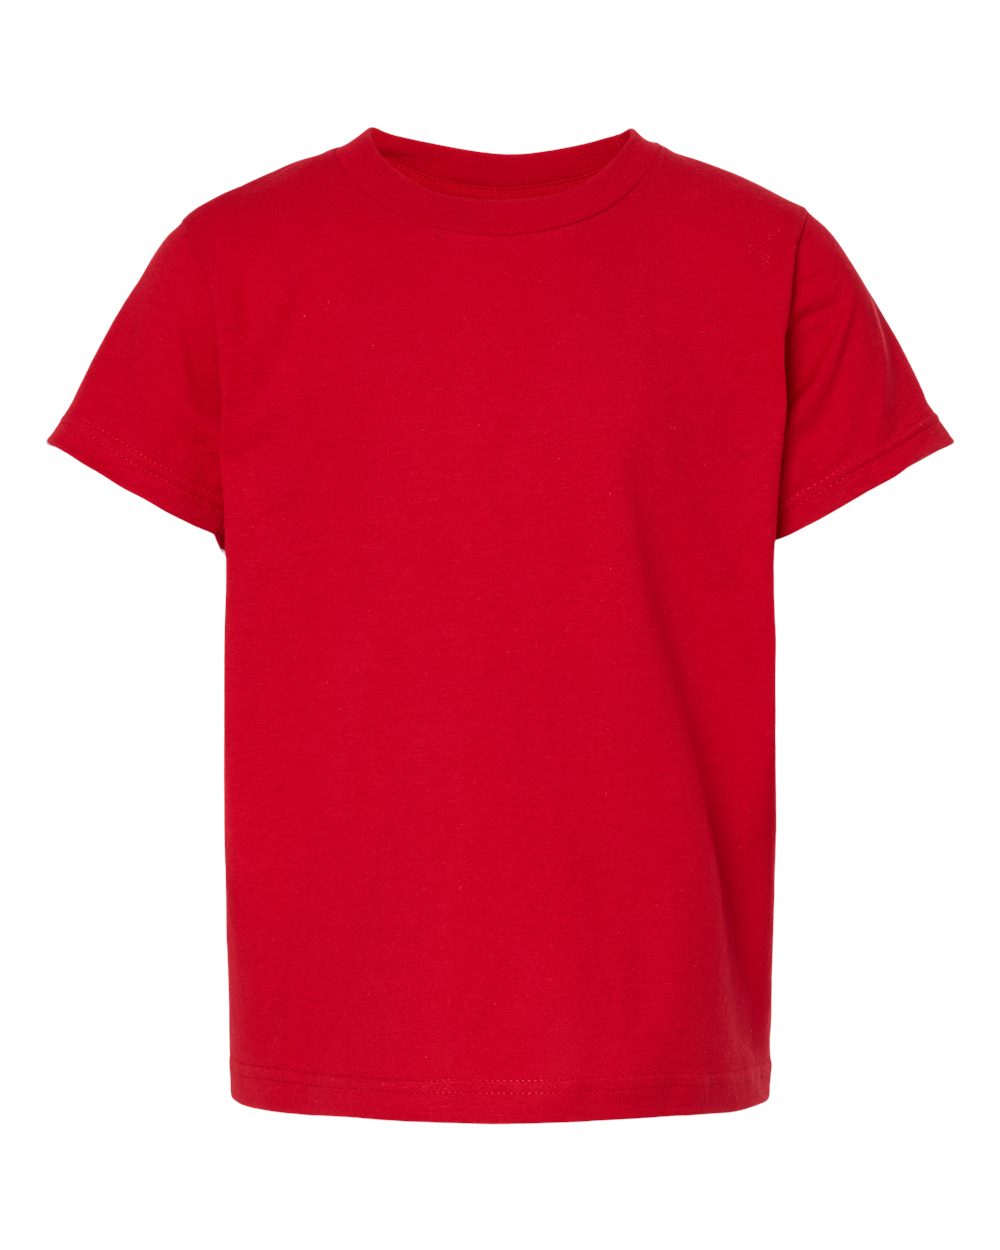 Tultex Youth Tee (235) in Red